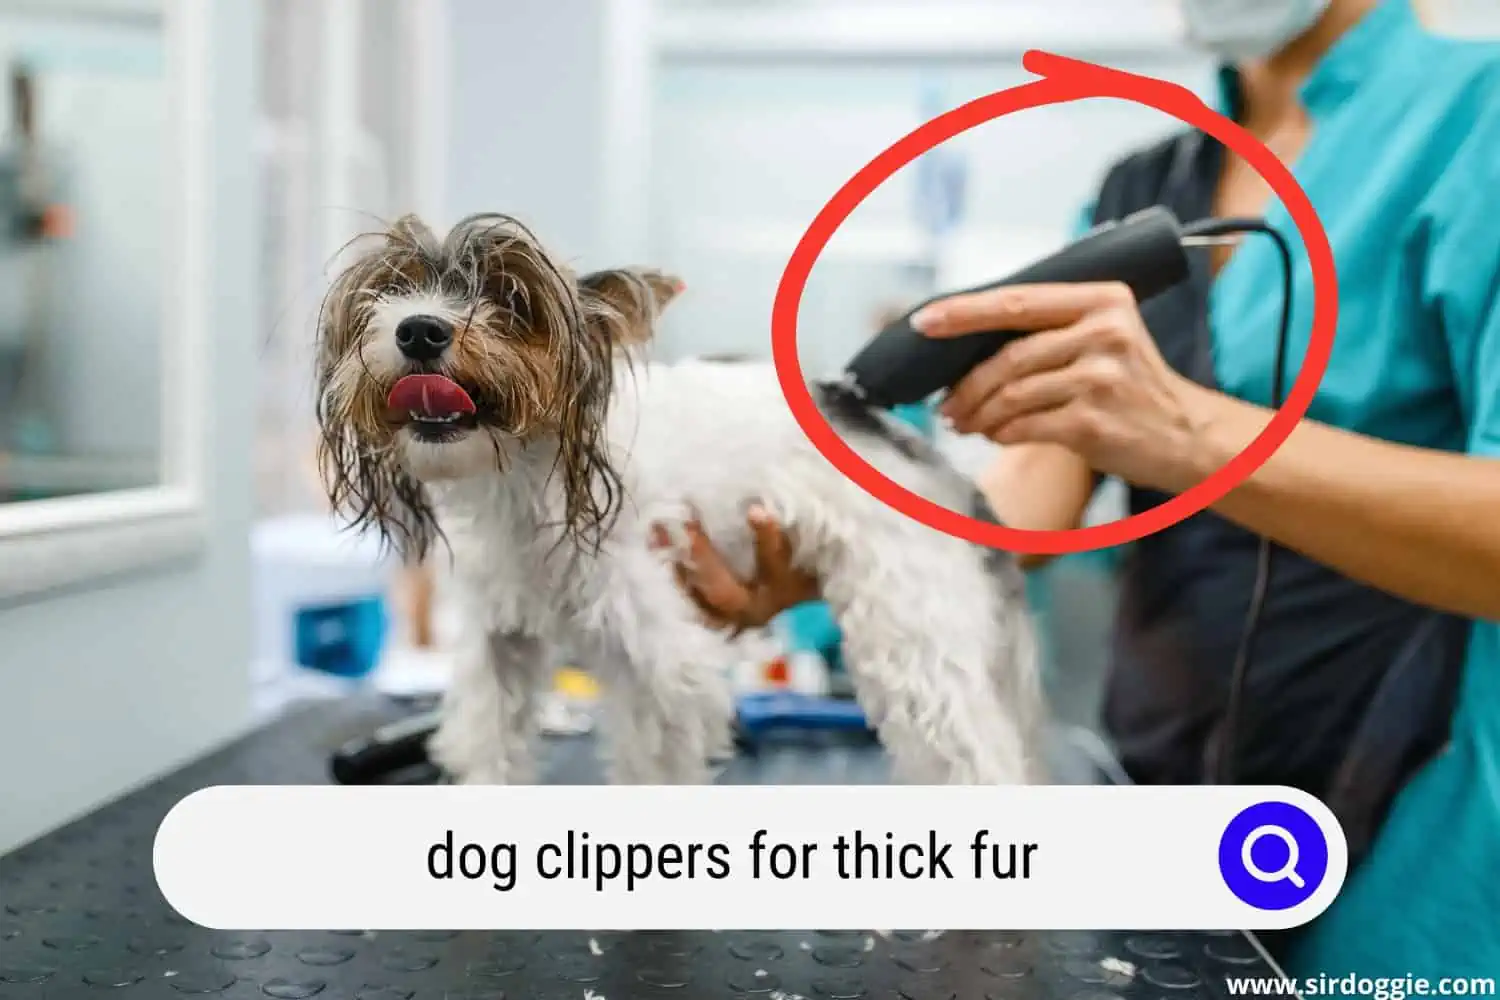 A cute dog being groomed with dog clippers